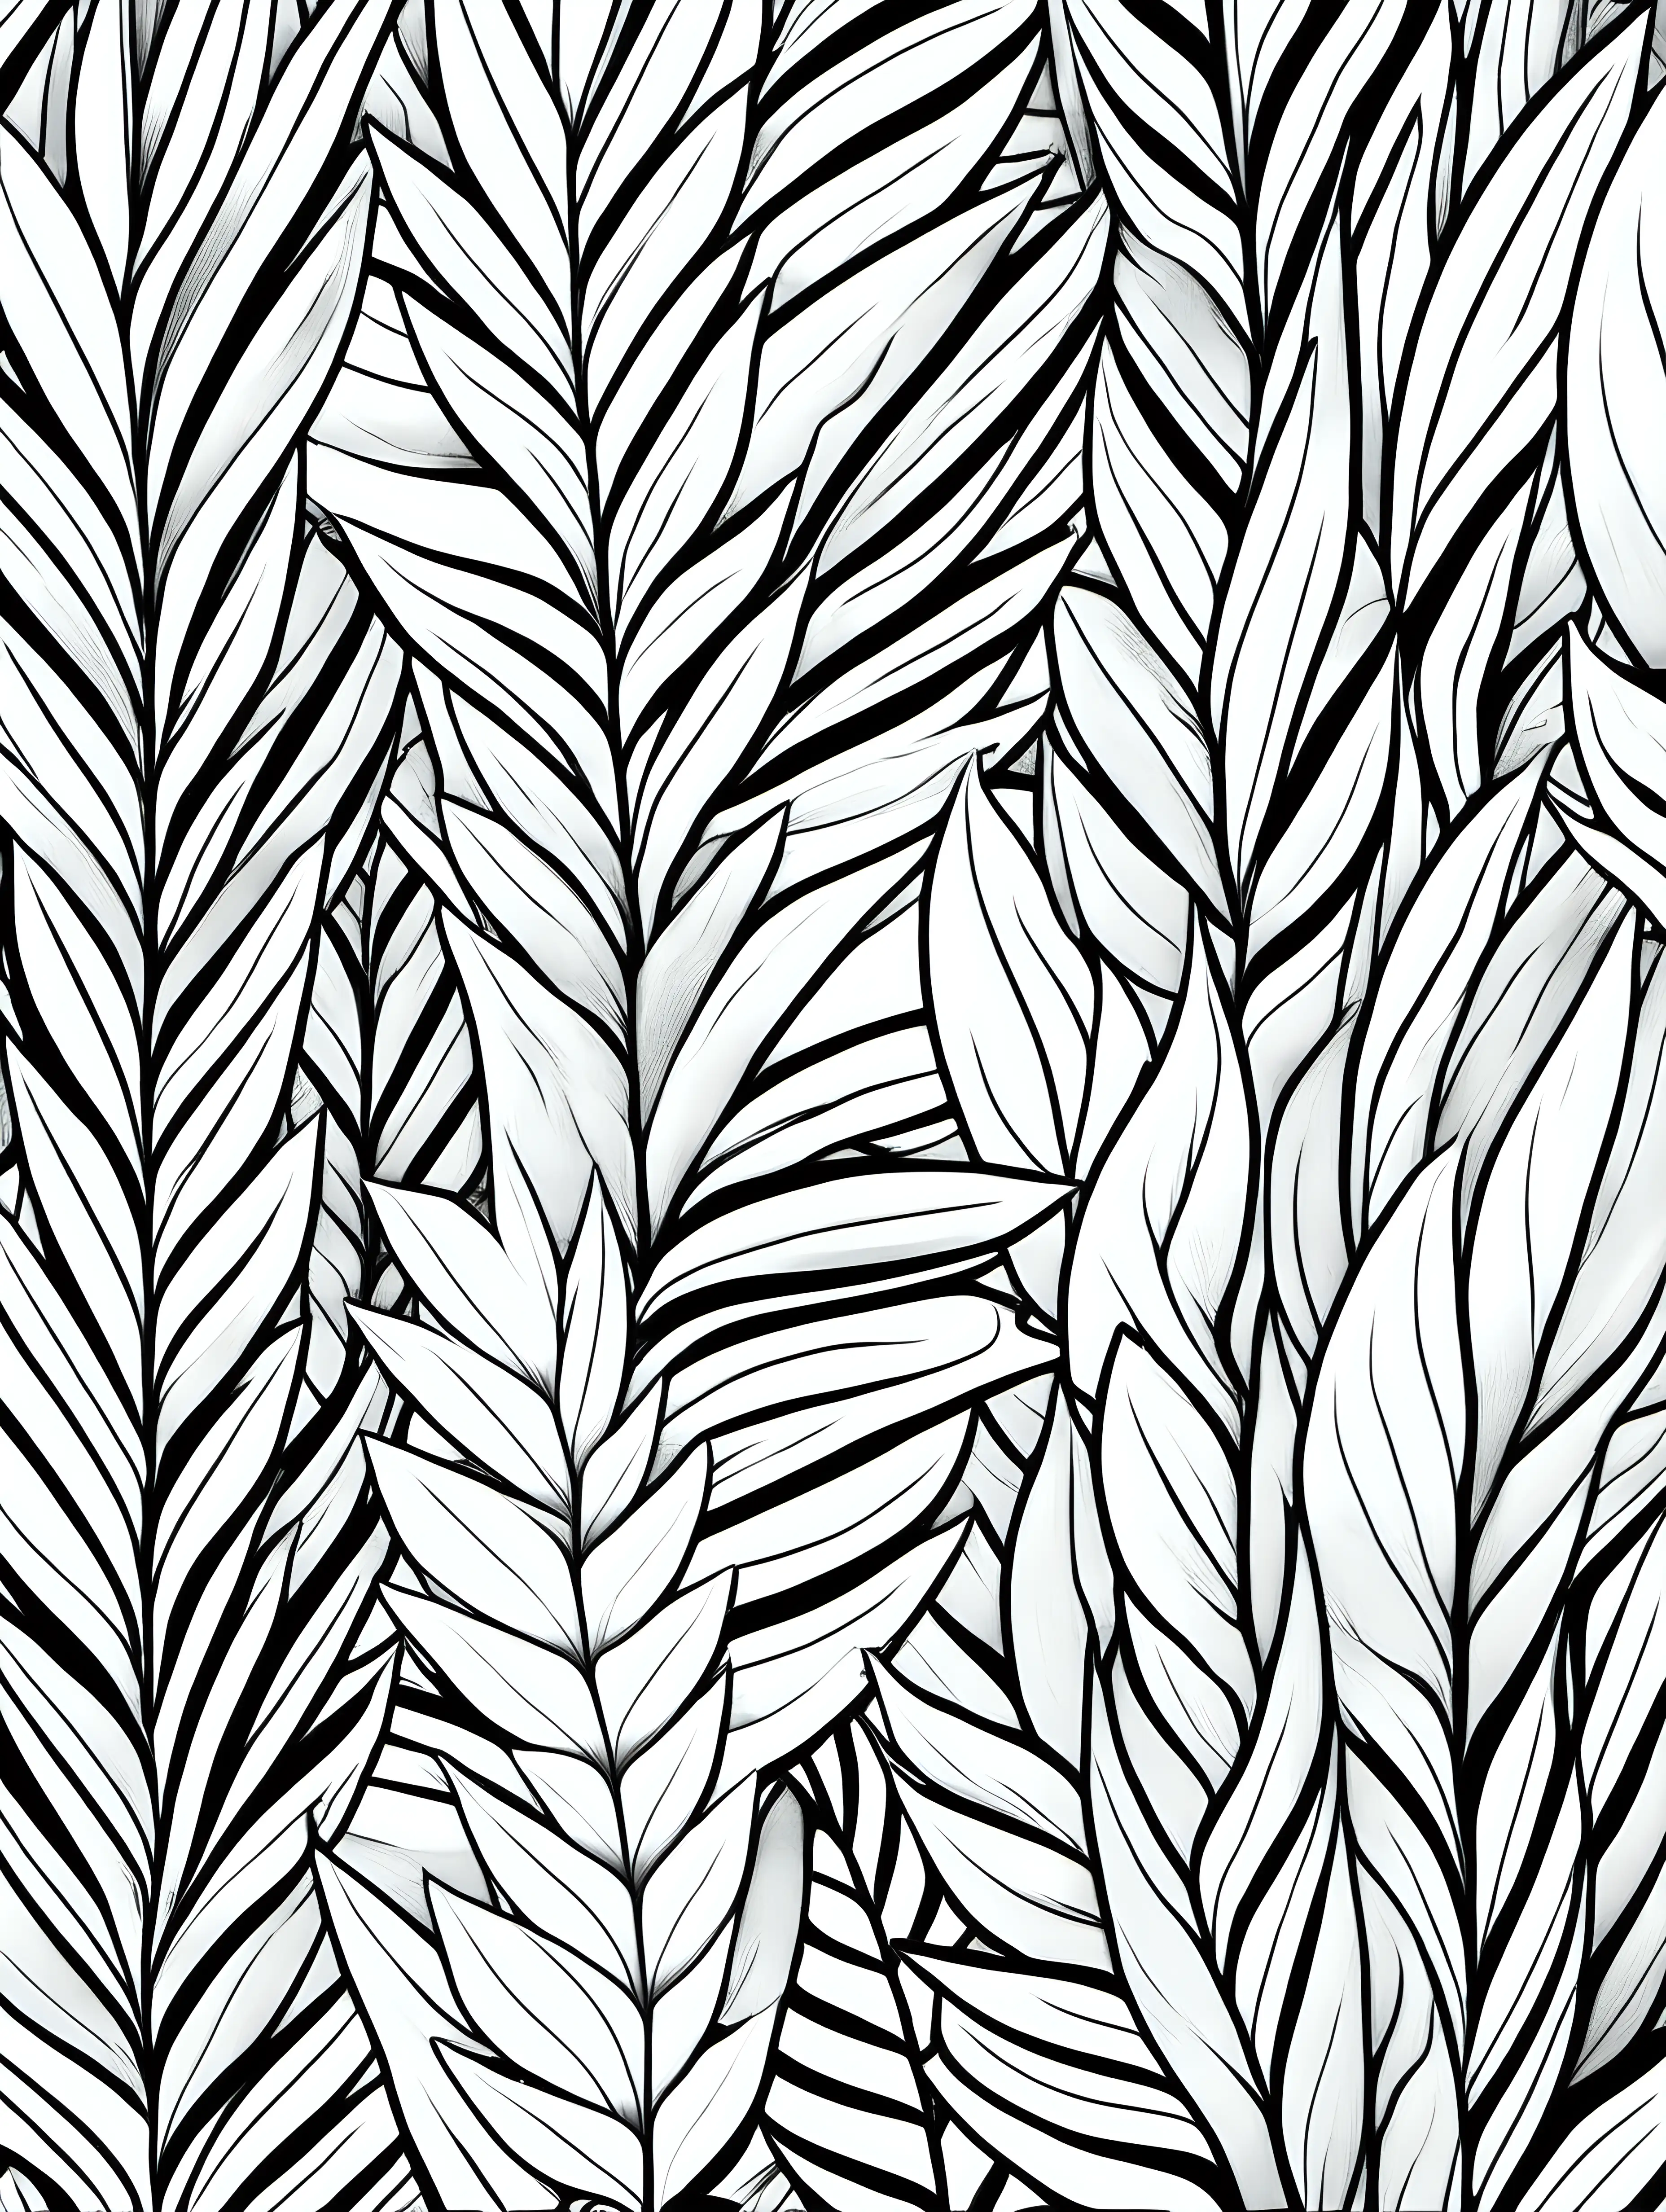 Repetitive Black and White Leaves Coloring Page